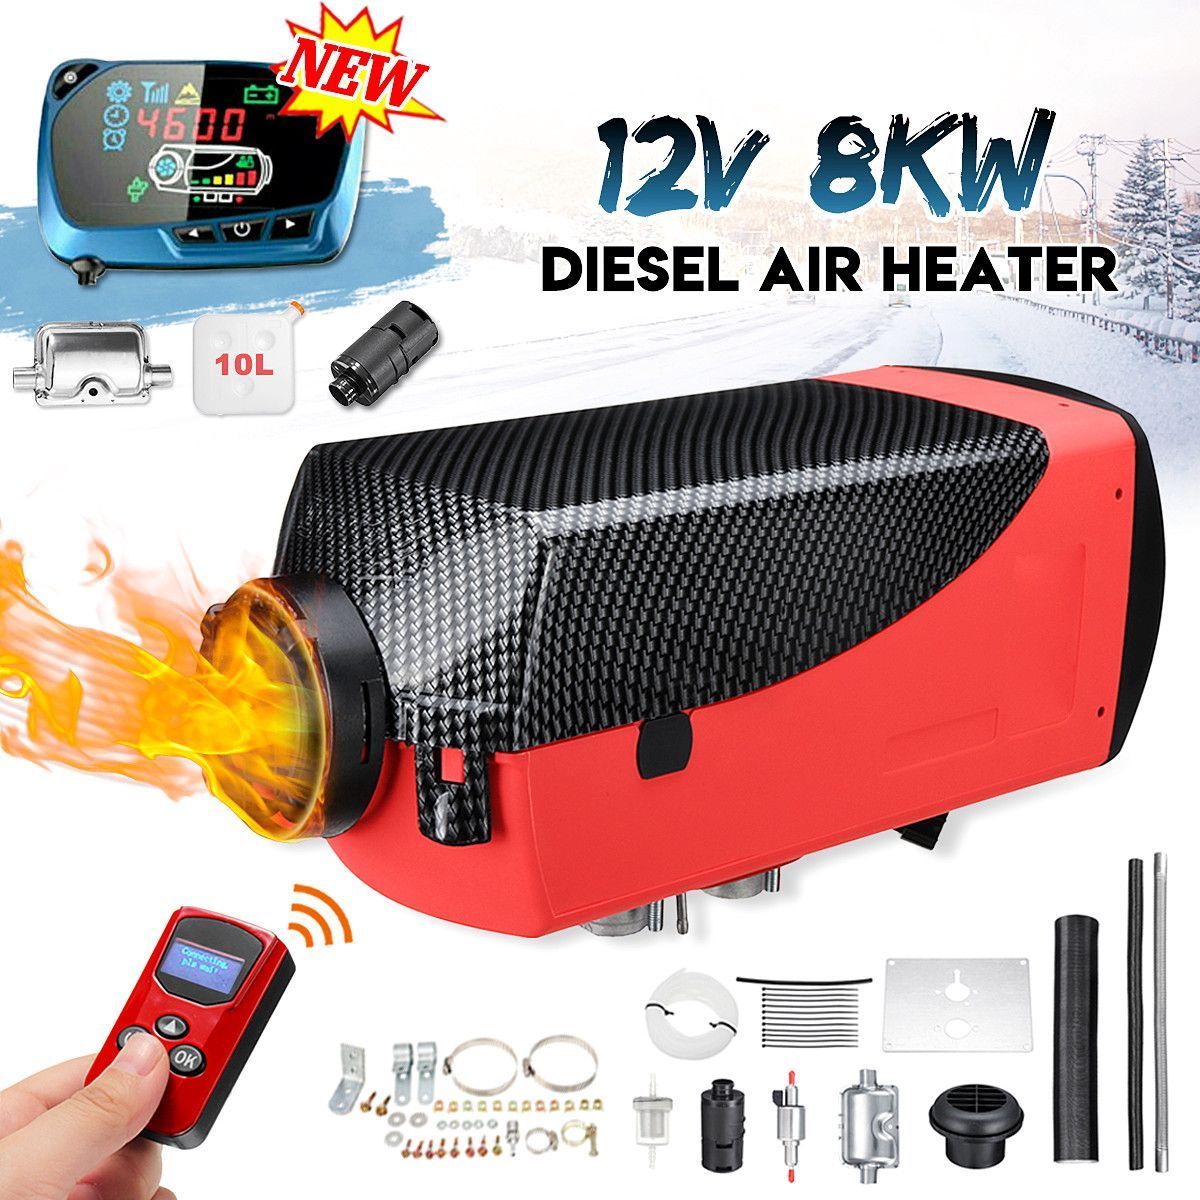 Upgraded-12V-5-8KW-Parking-Heater-Air-Diesel-LCD-Thermostat-Remote-Control-Silencer-For-Car-RV-Truck-1453756